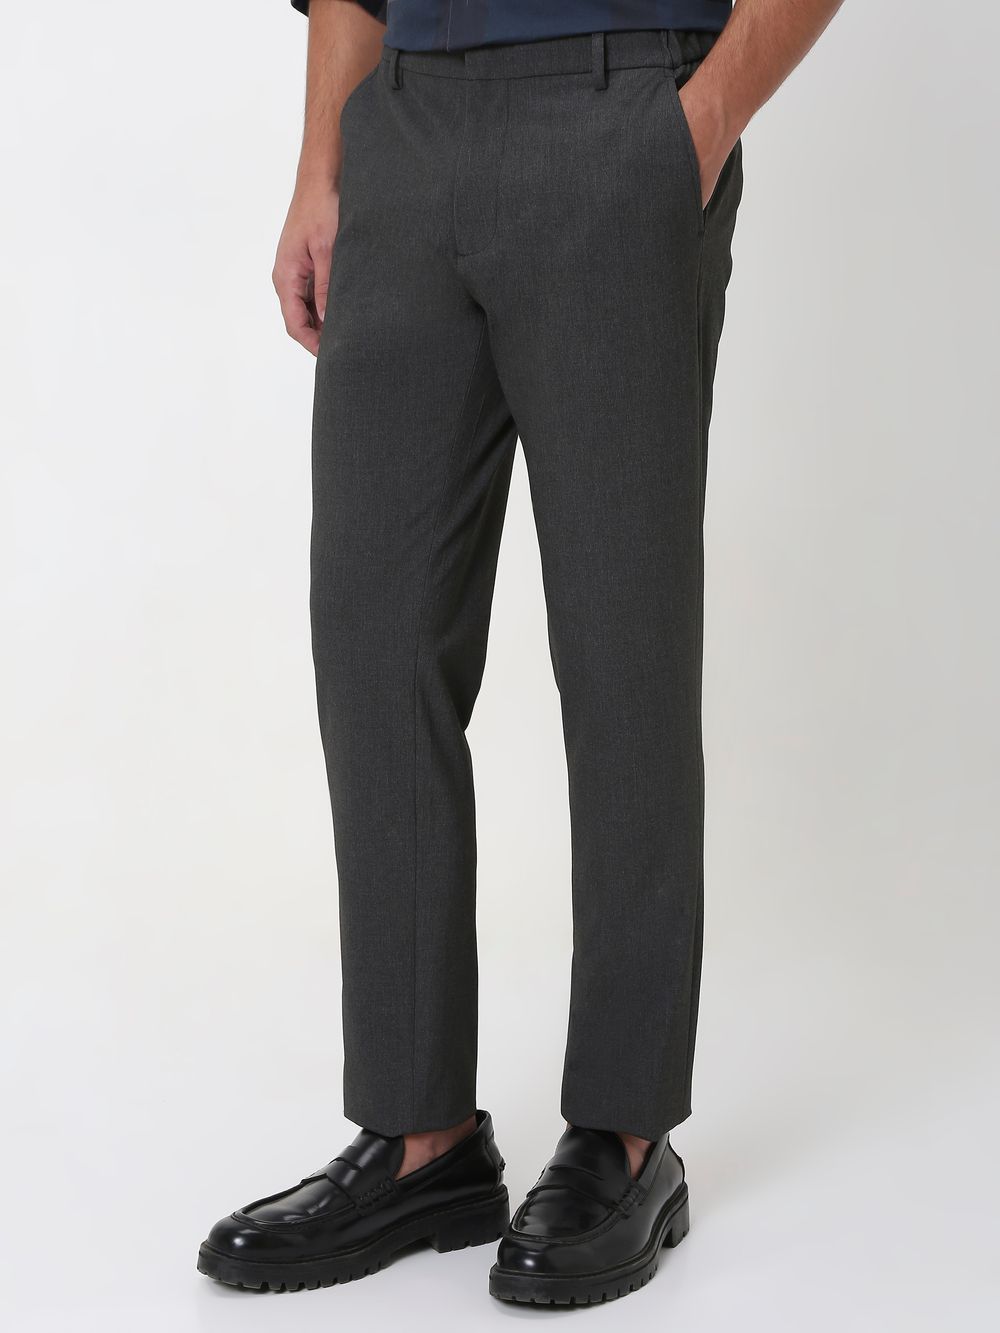 Black Slim Fit Textured Jersey Stretch Chinos Trouser